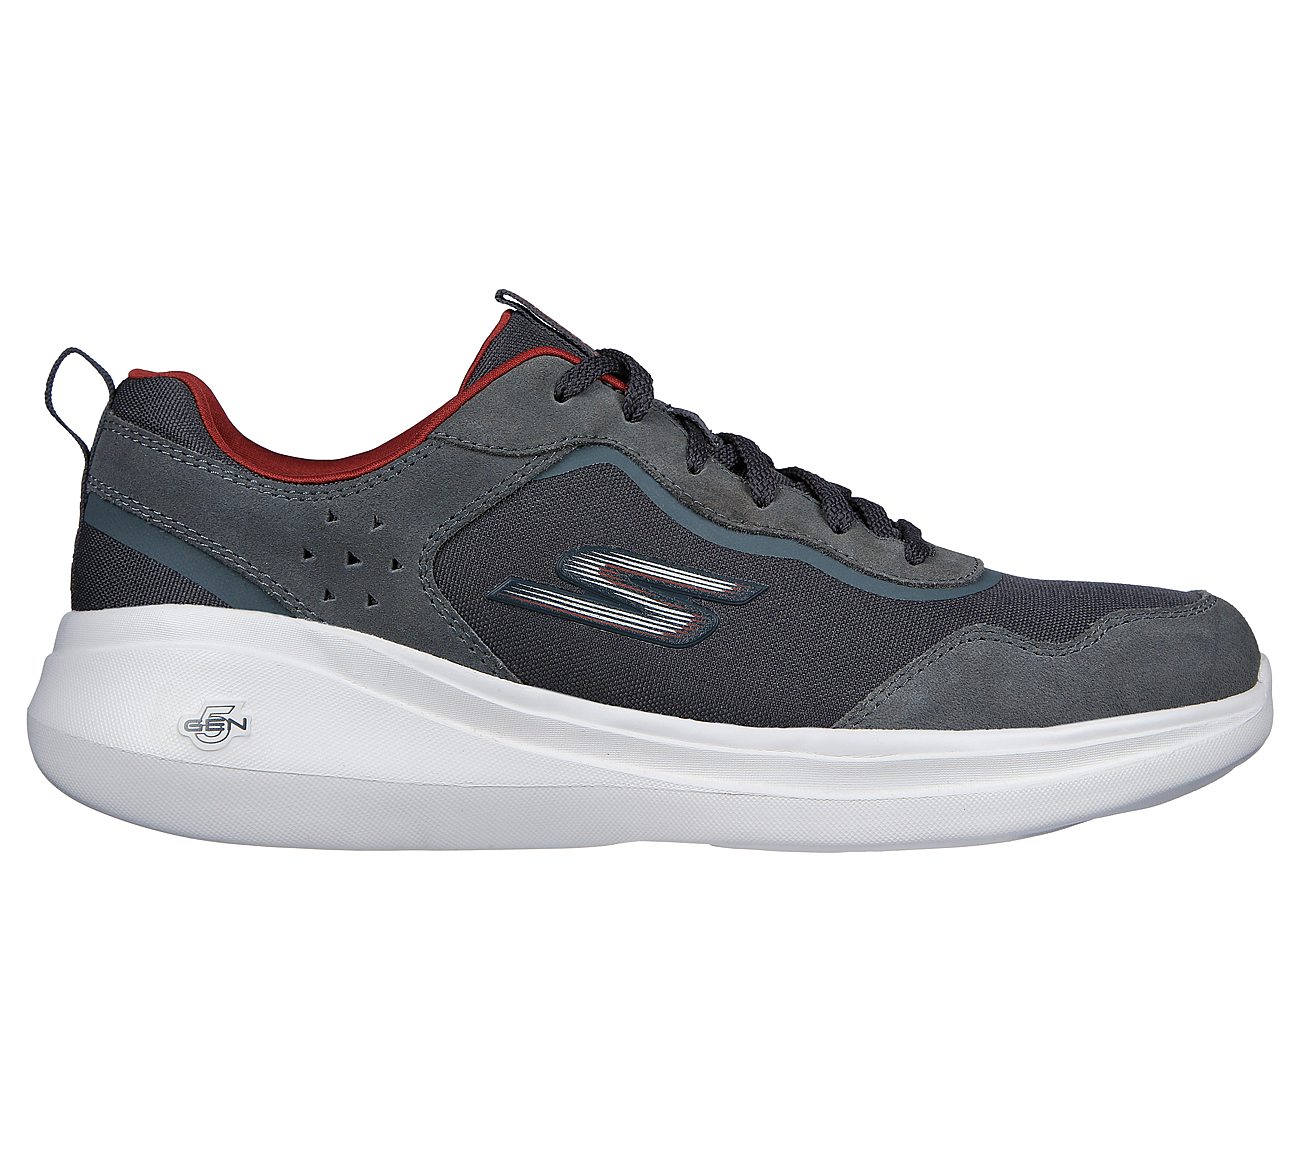 GO RUN FAST - HURTLING, CCHARCOAL Footwear Right View